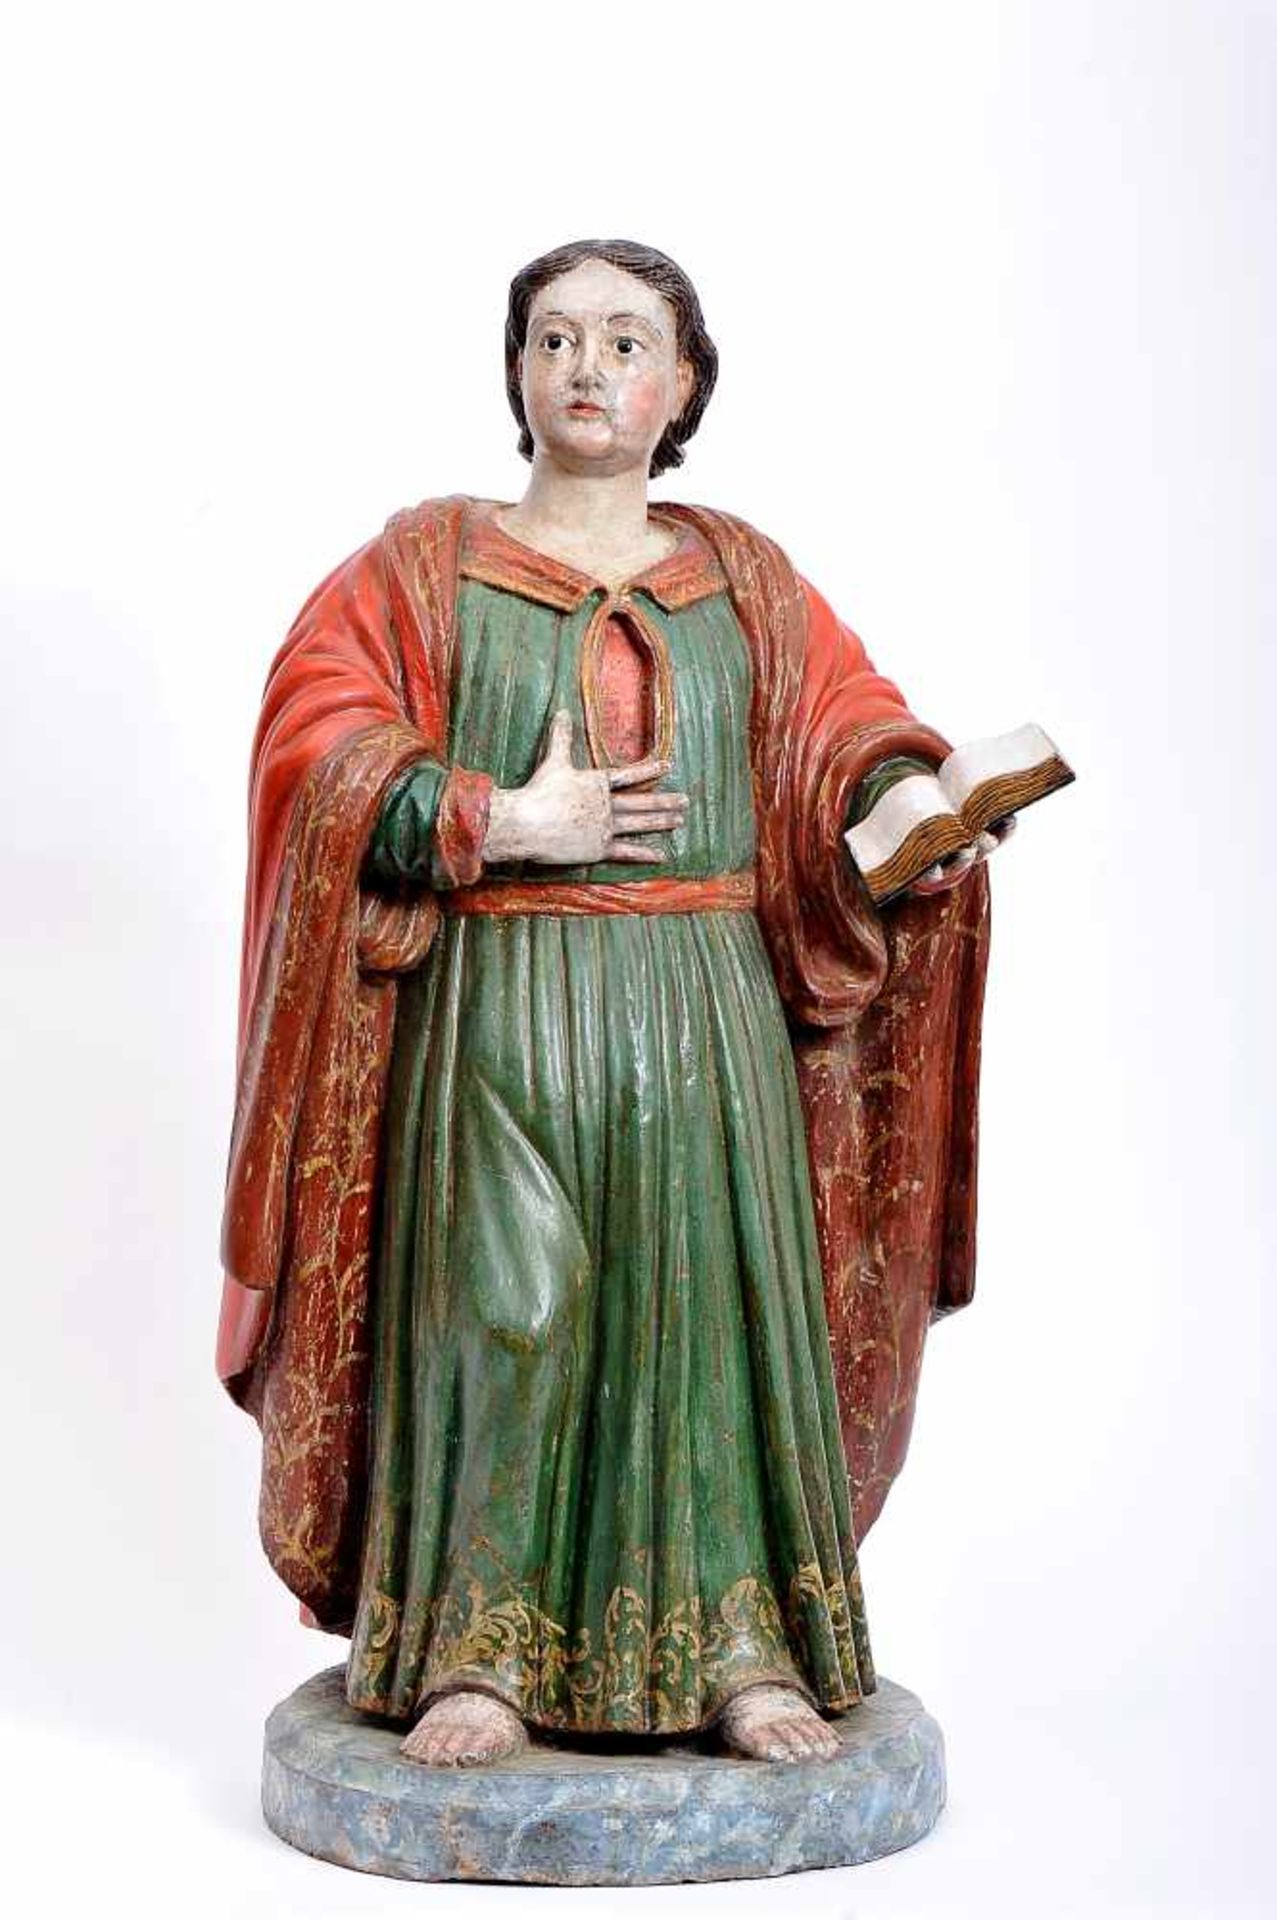 Saint John the Evangelist with reliquary on his chest